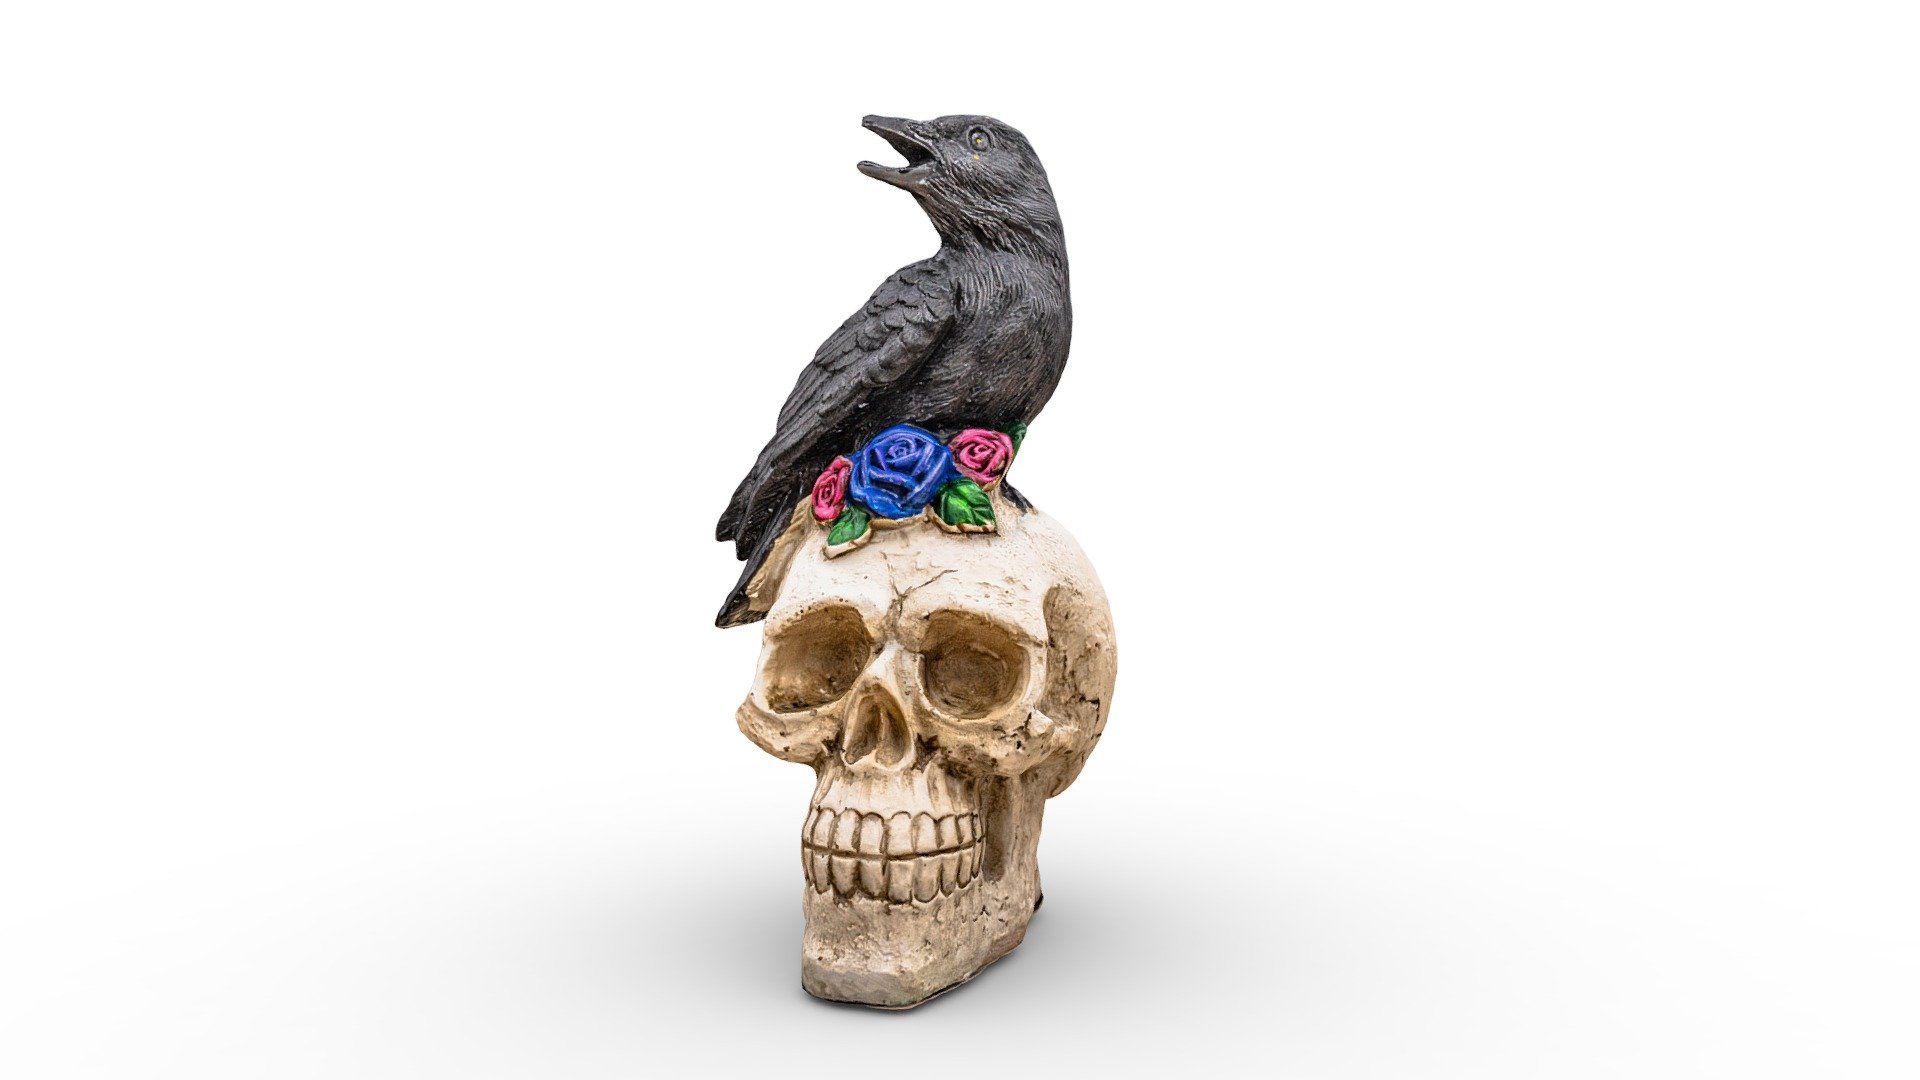 Photogrammetry digitization of a decoration representing a raven on a skull with some coloured roses. 109 photos processed on medium quality 3d model